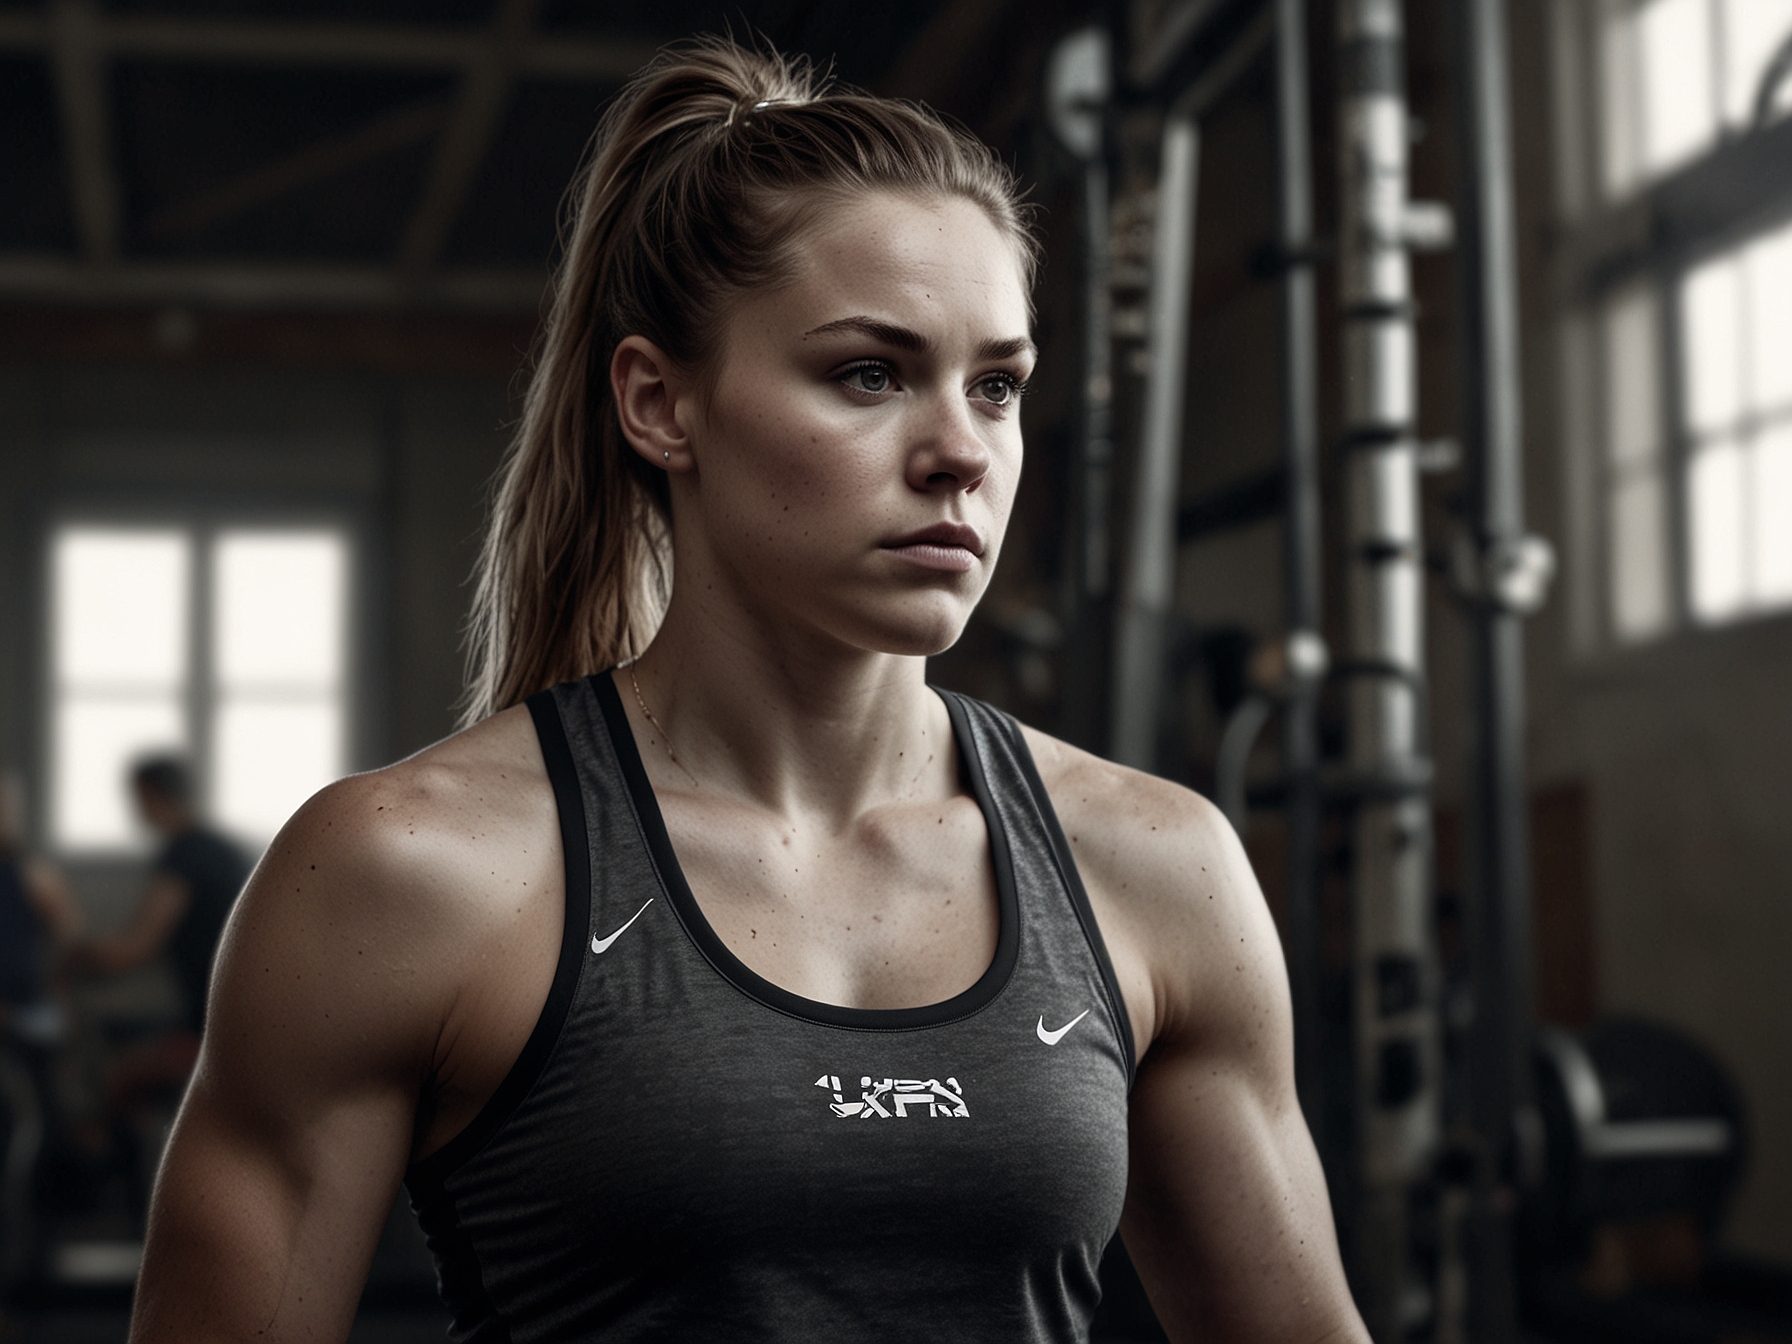 Caitlin Clark, in a gym, lifting weights with determination, highlighting her commitment to strength training and building muscle mass for the physical demands of the WNBA.